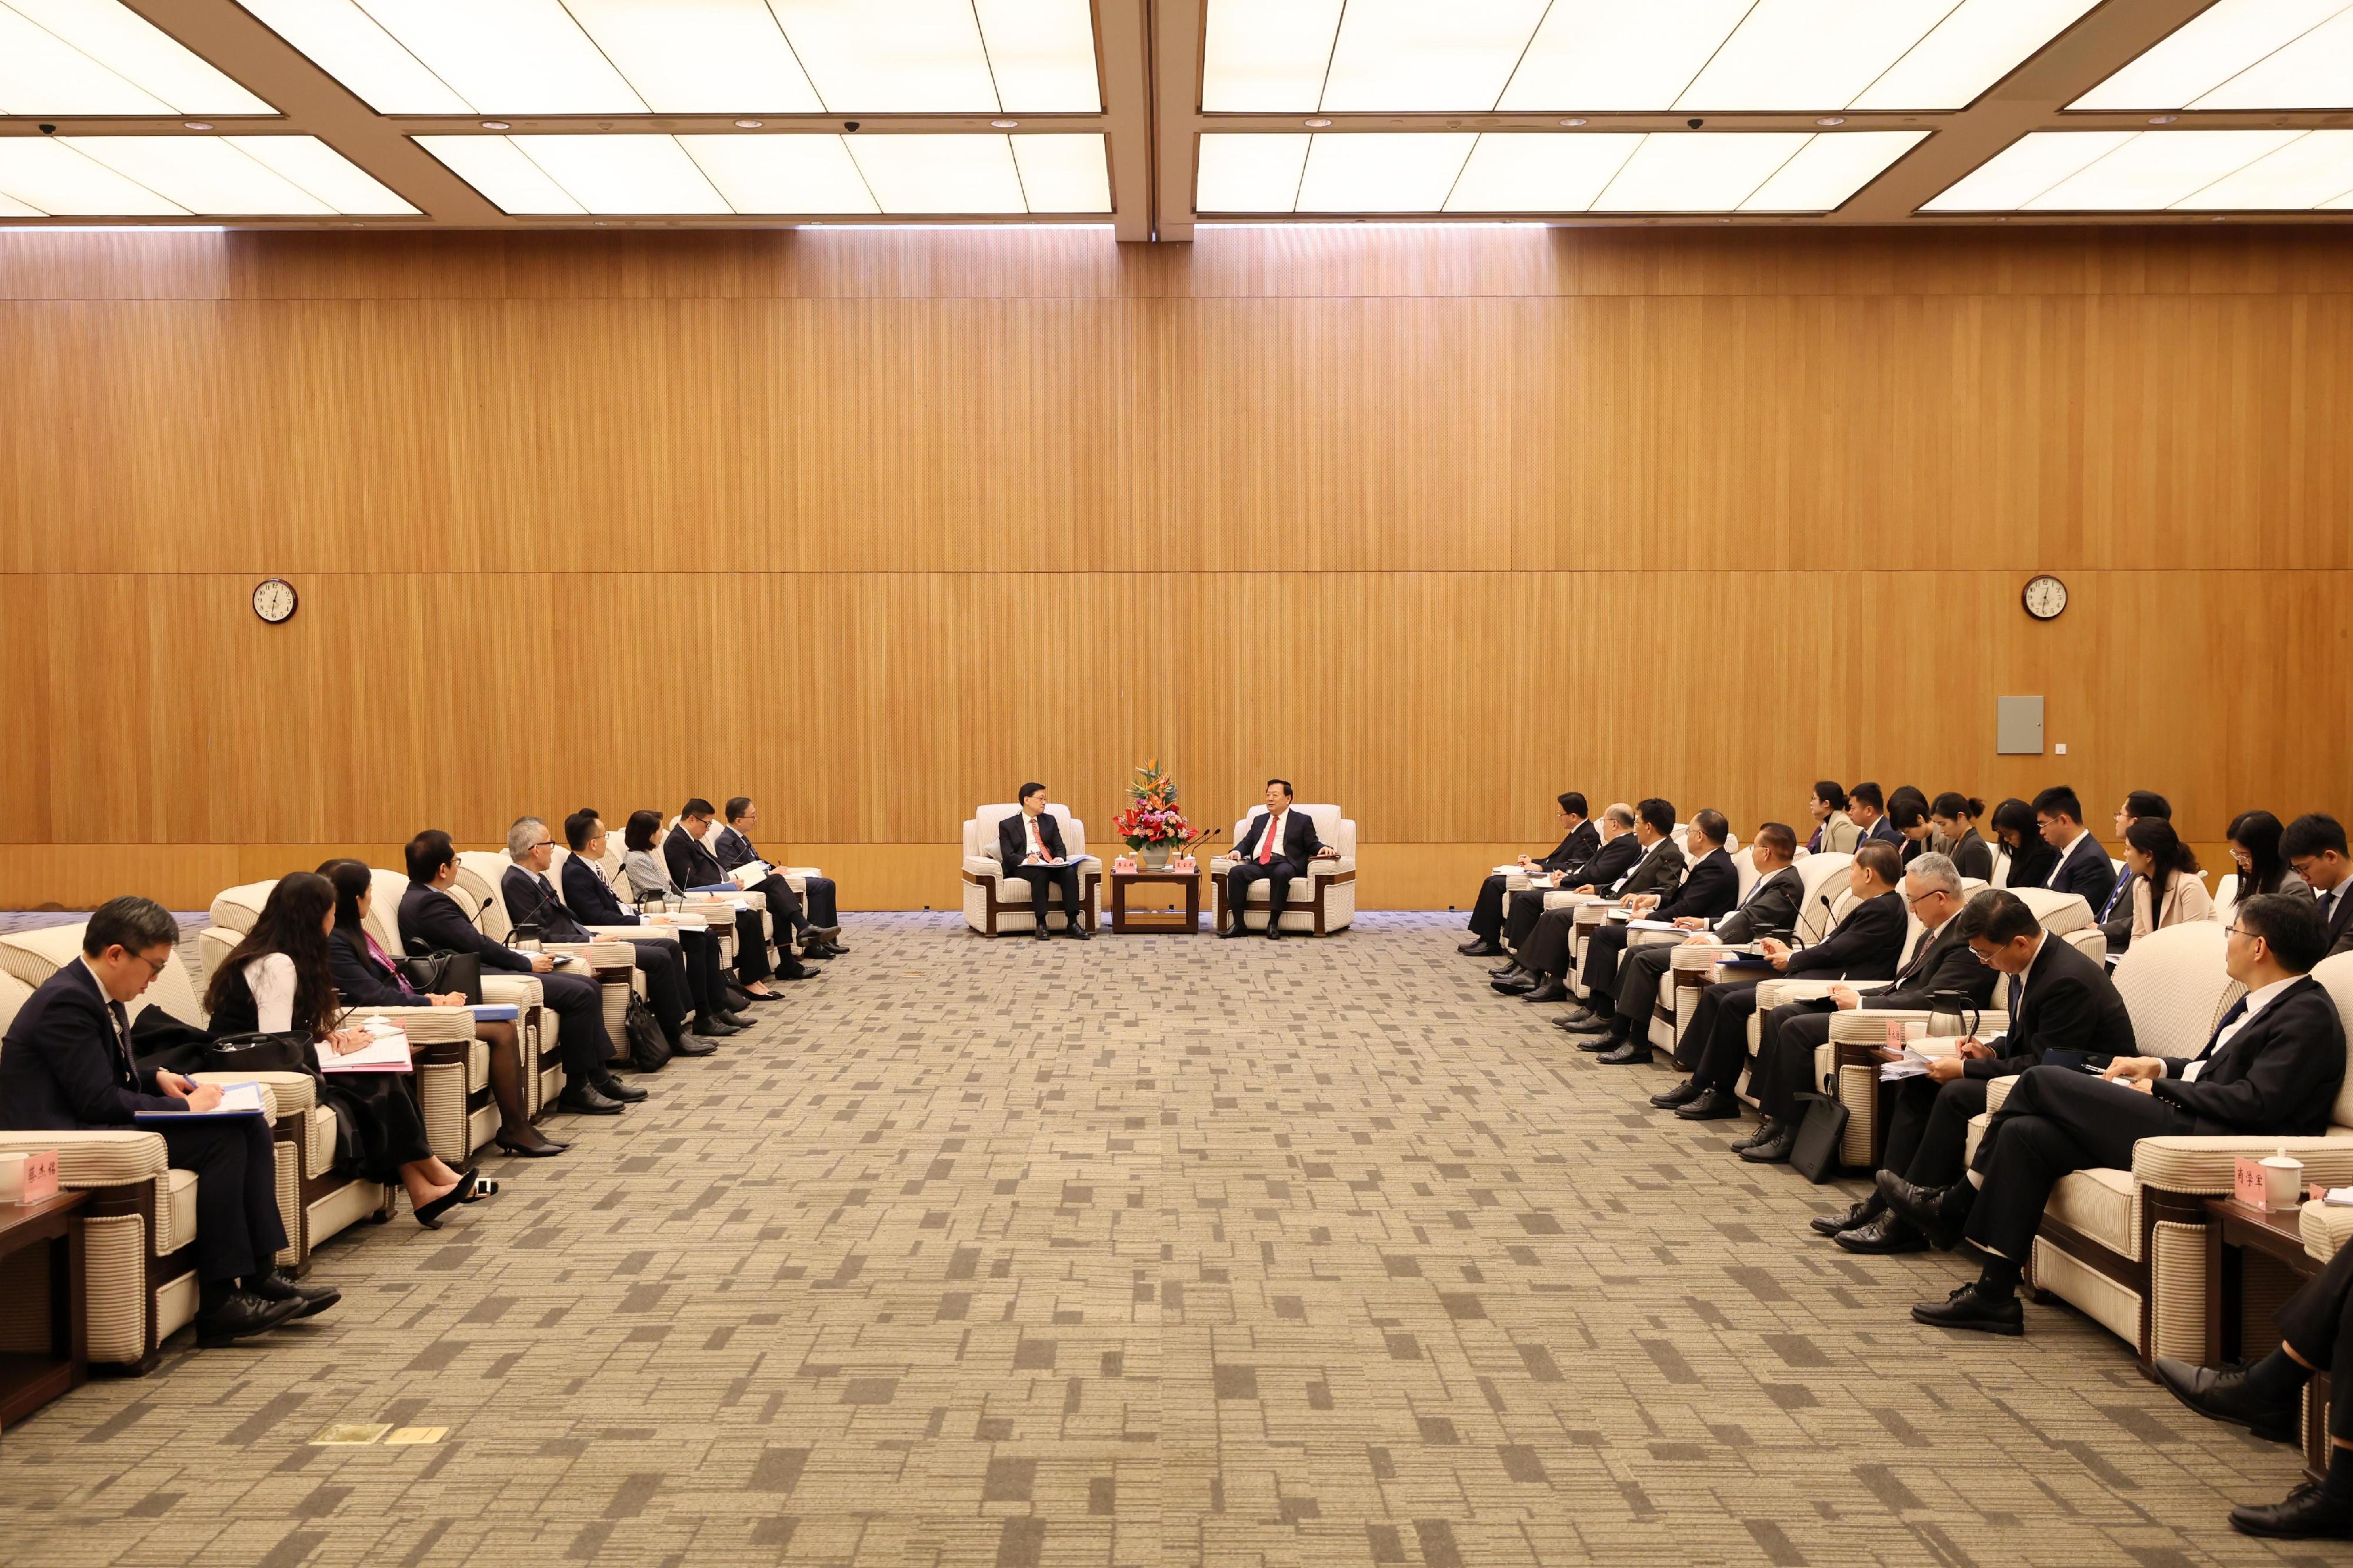 The Director of the Hong Kong and Macao Work Office of the Communist Party of China Central Committee and the Hong Kong and Macao Affairs Office of the State Council, Mr Xia Baolong (11th left), meets the Chief Executive, Mr John Lee (10th left), in Shenzhen this morning (March 21). The Secretary for Justice, Mr Paul Lam, SC (ninth left); the Secretary for Security, Mr Tang Ping-keung (eighth left); and the Director of the Chief Executive's Office, Ms Carol Yip (seventh left), also joined the meeting.